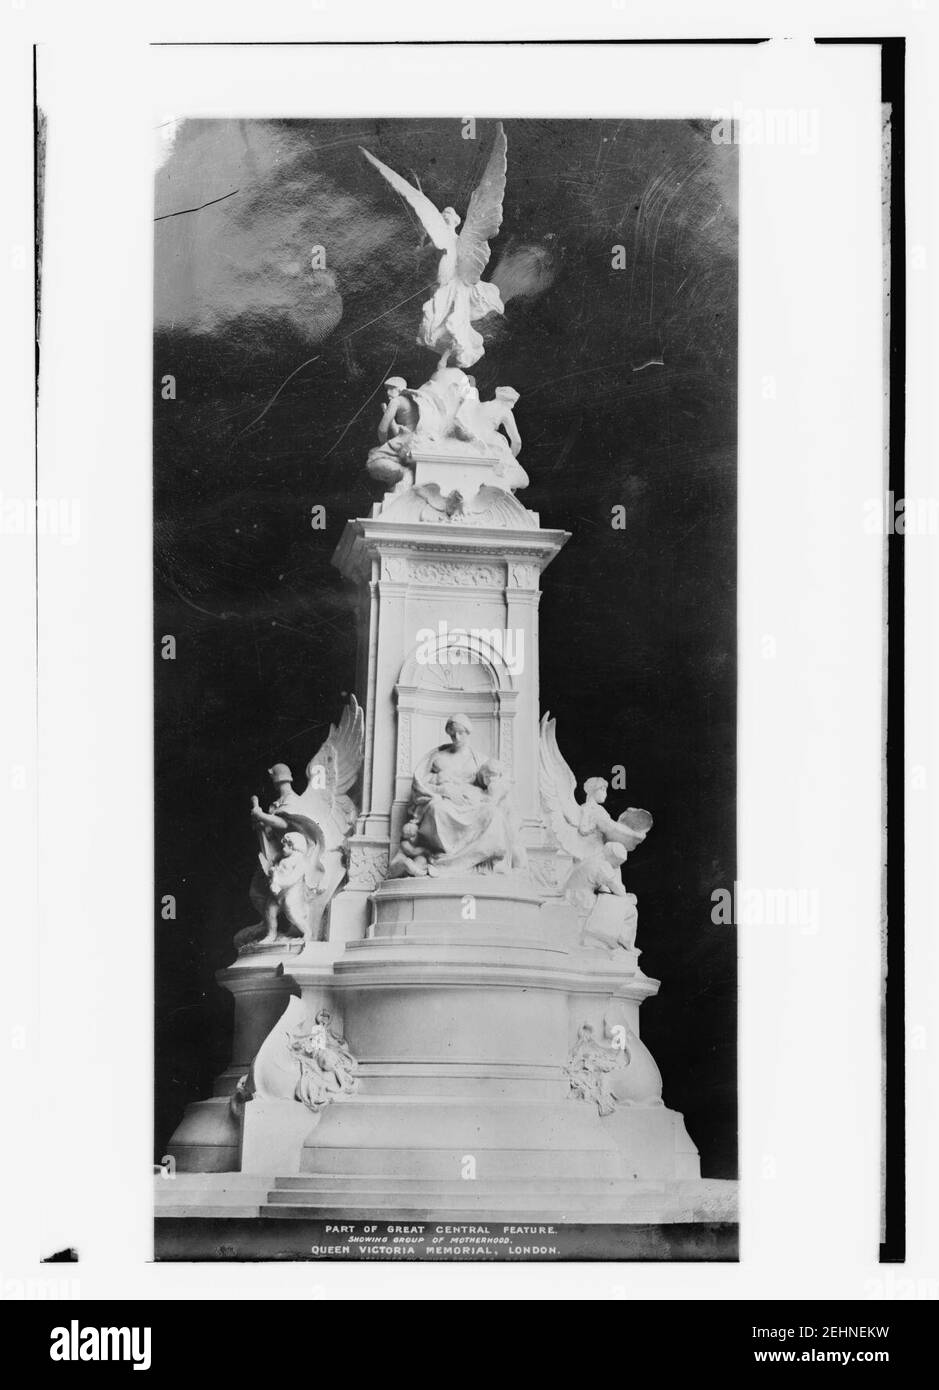 Part of Great Central Feature Showing Group of Motherhood. Queen Victoria Memorial, London Stock Photo